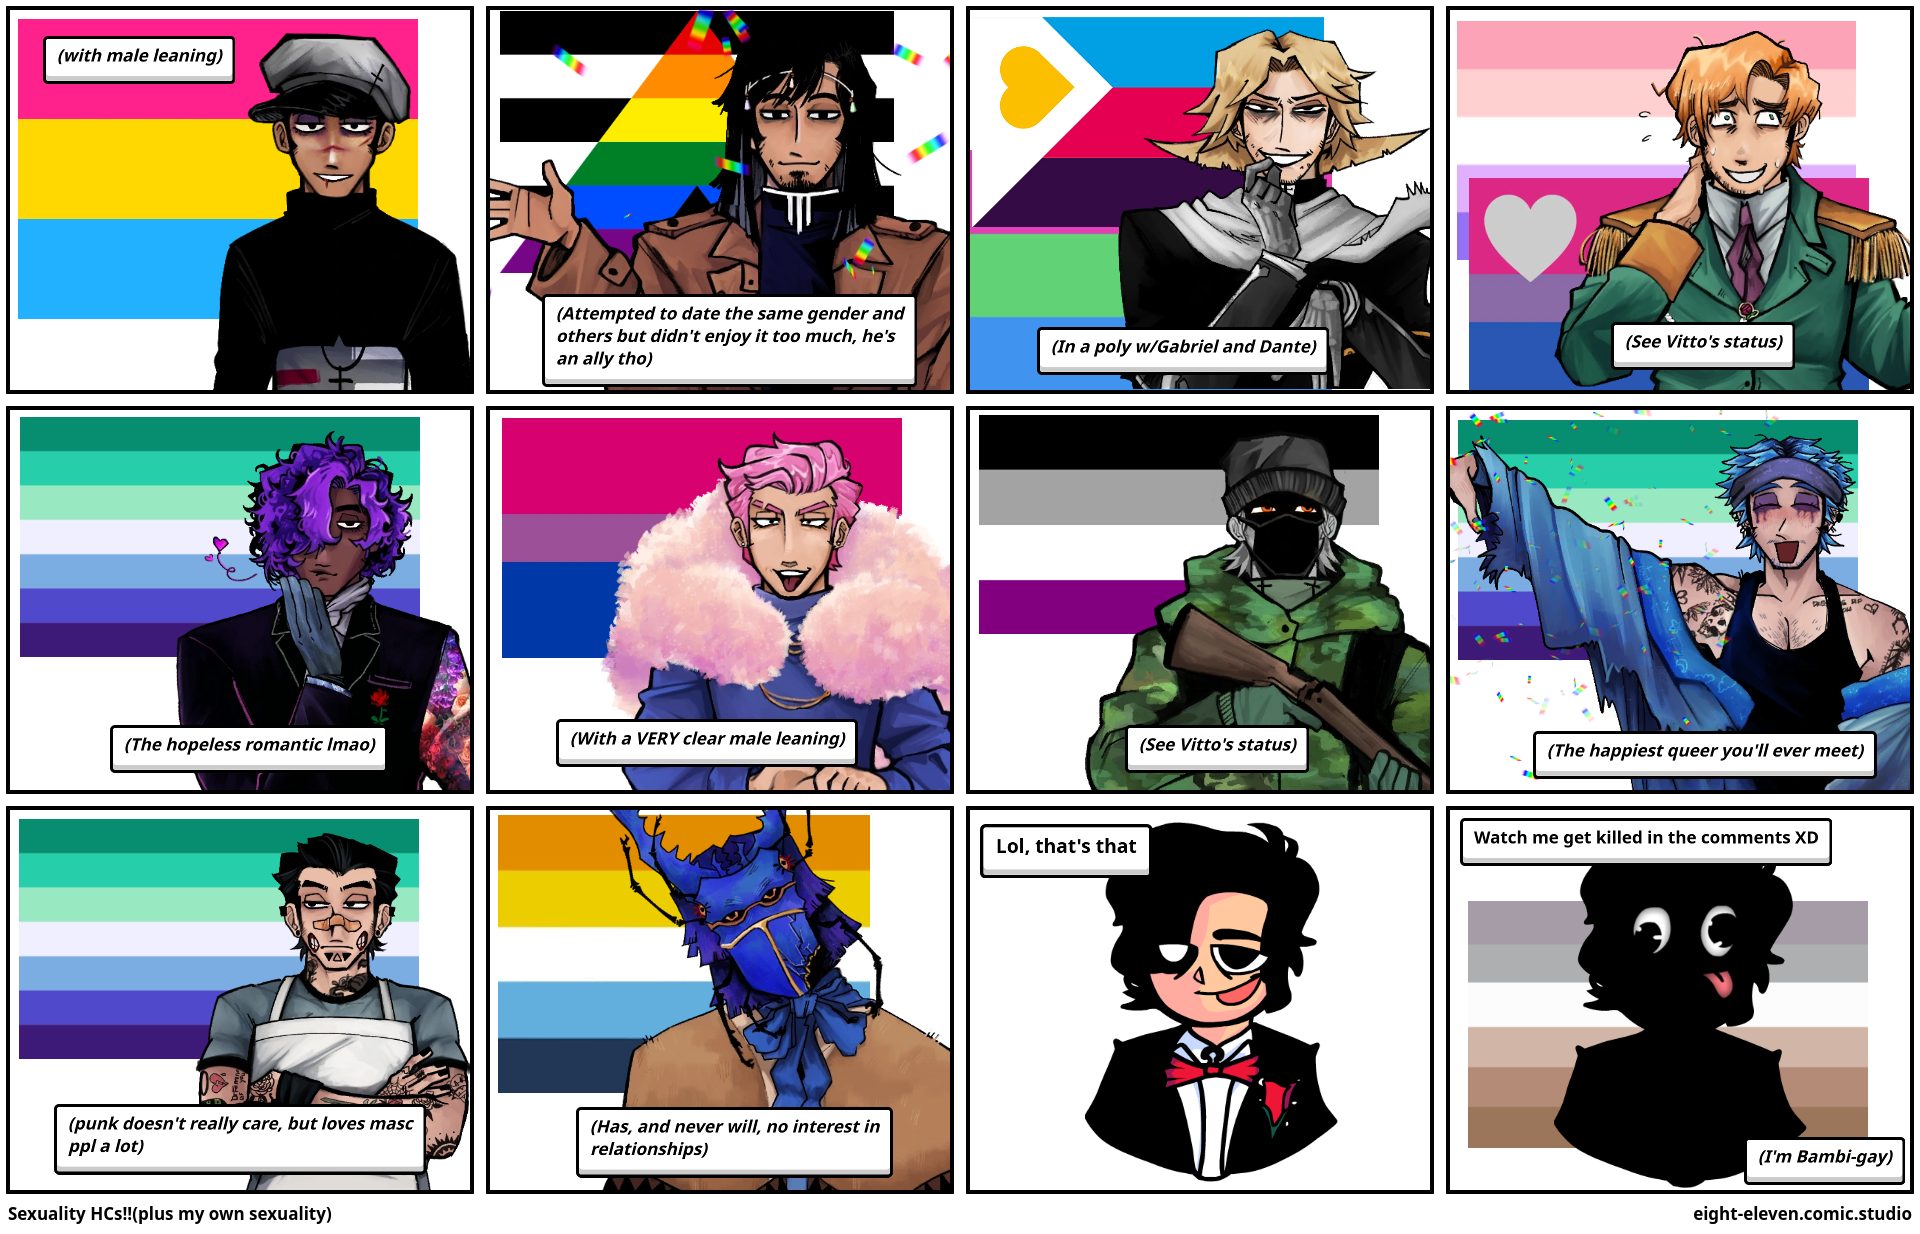 Sexuality HCs!!(plus my own sexuality)